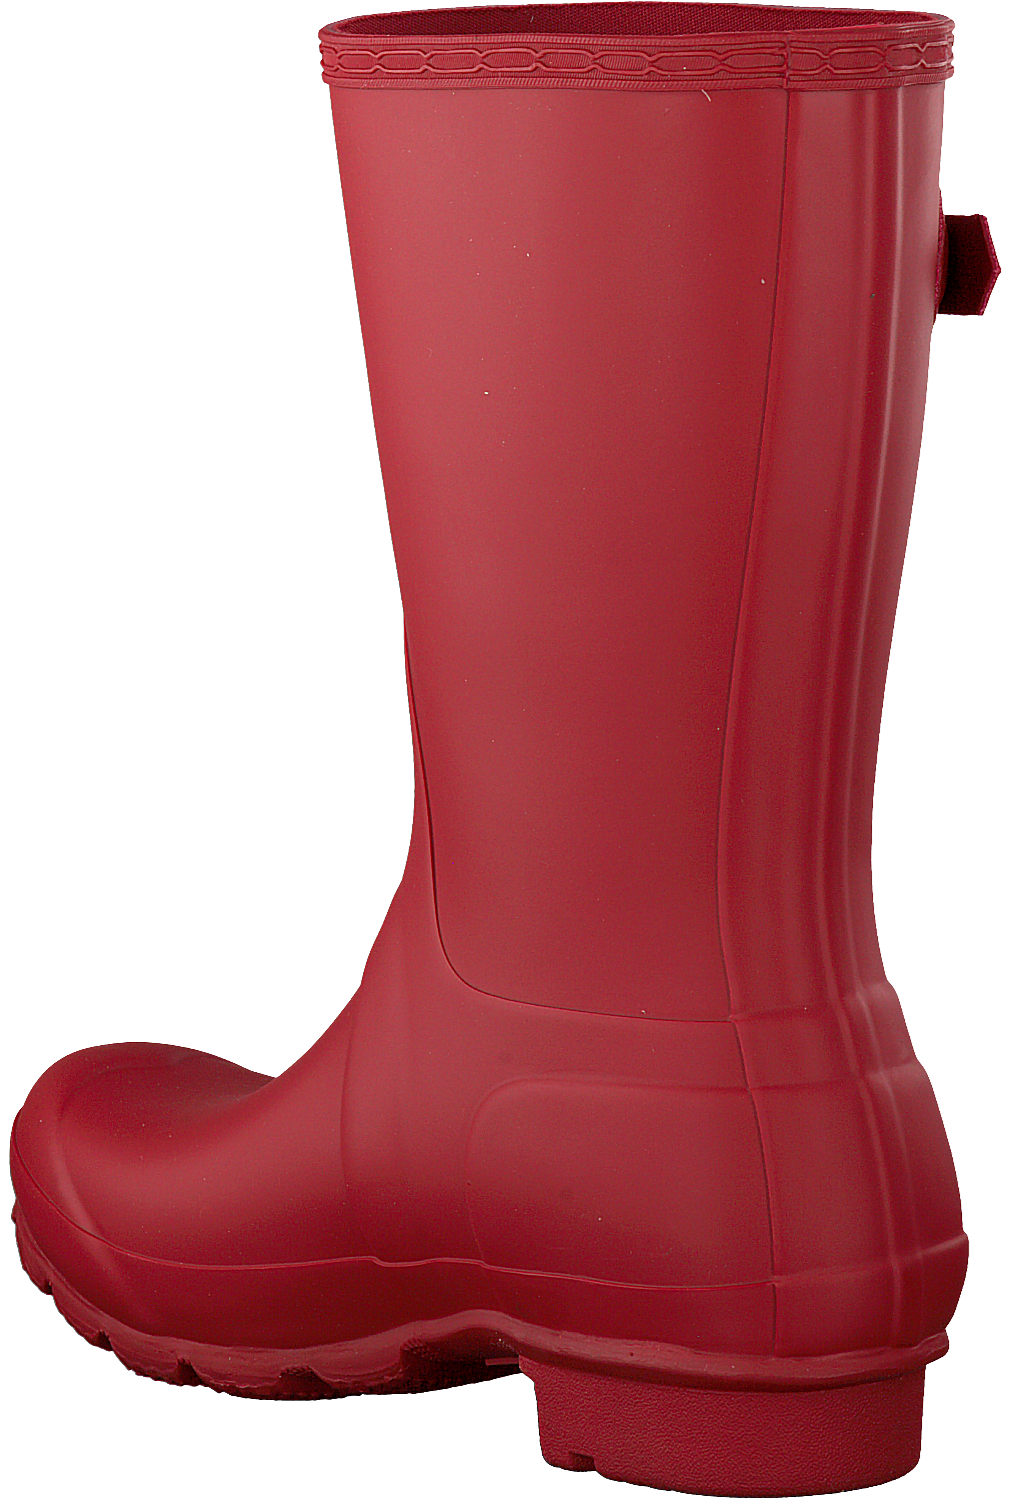 Women Red Boots Transparent Background